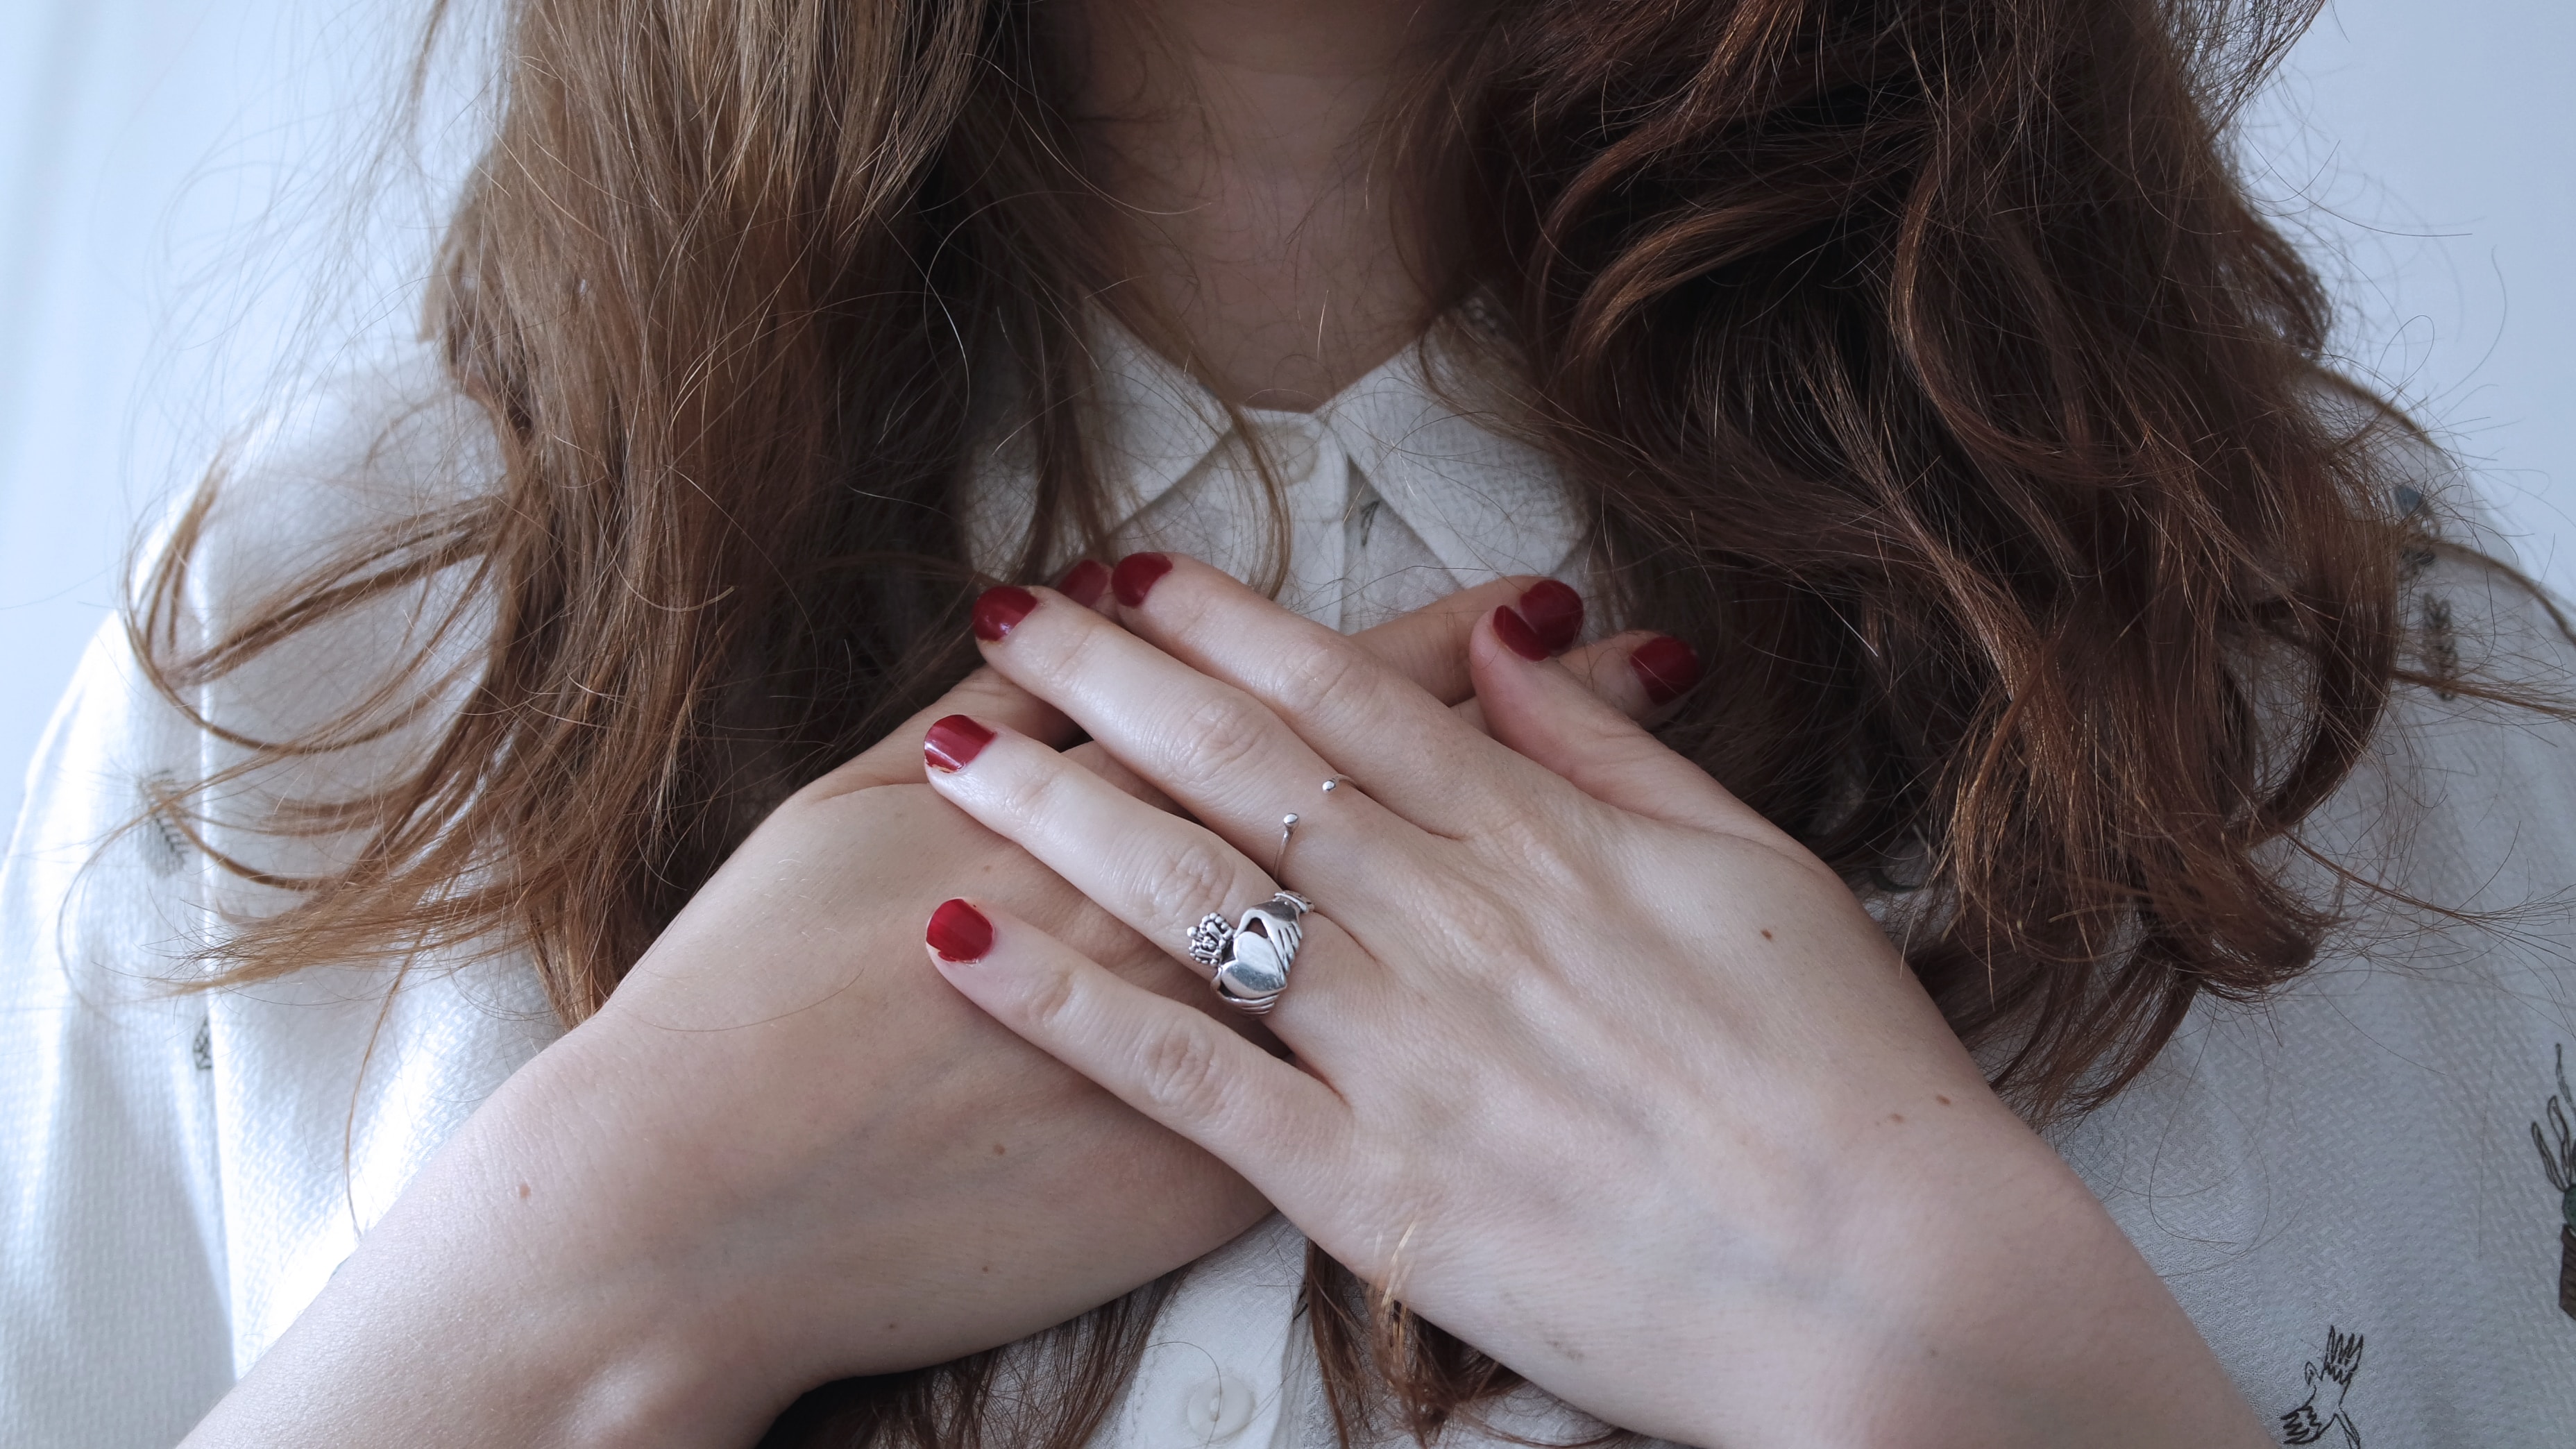 a person with long hair, red nails, and rings, holding their hands over the center of their chest